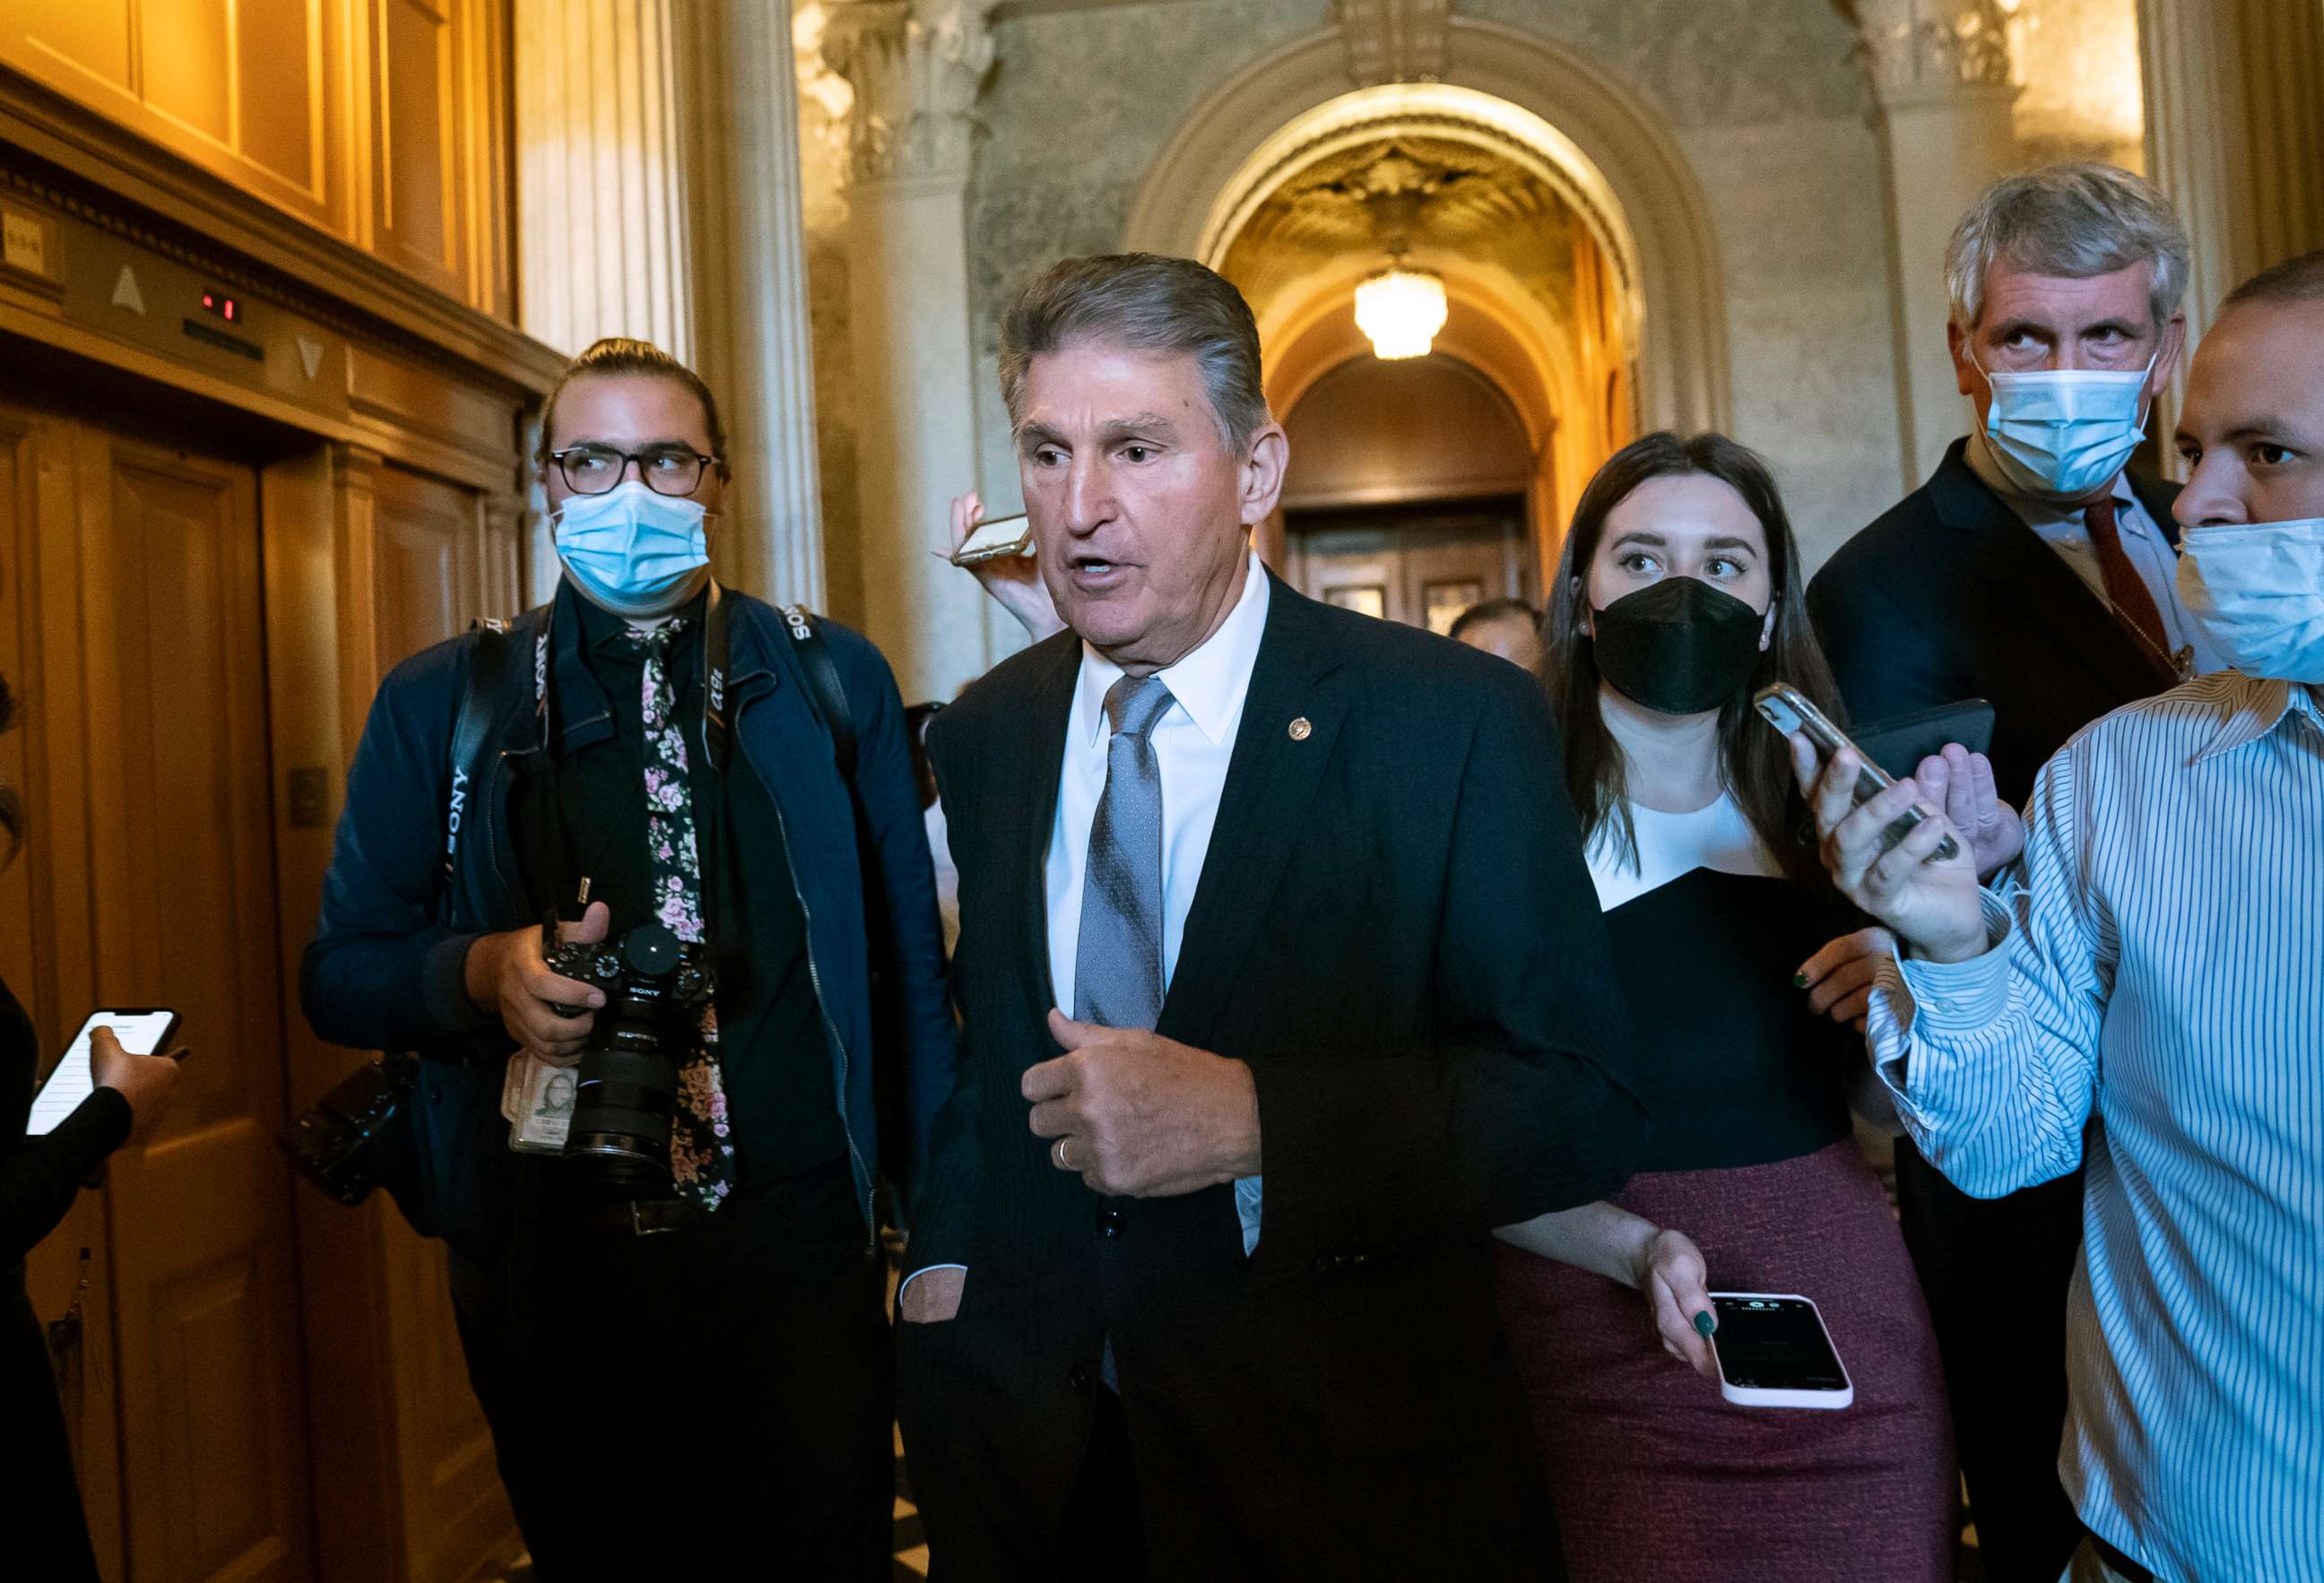 PHOTO: Sen. Joe Manchin, who has been a key holdout on President Joe Biden's ambitious domestic package, is surrounded by reporters as he leaves the chamber after a vote, at the Capitol in Washington, D.C., Nov. 3, 2021.